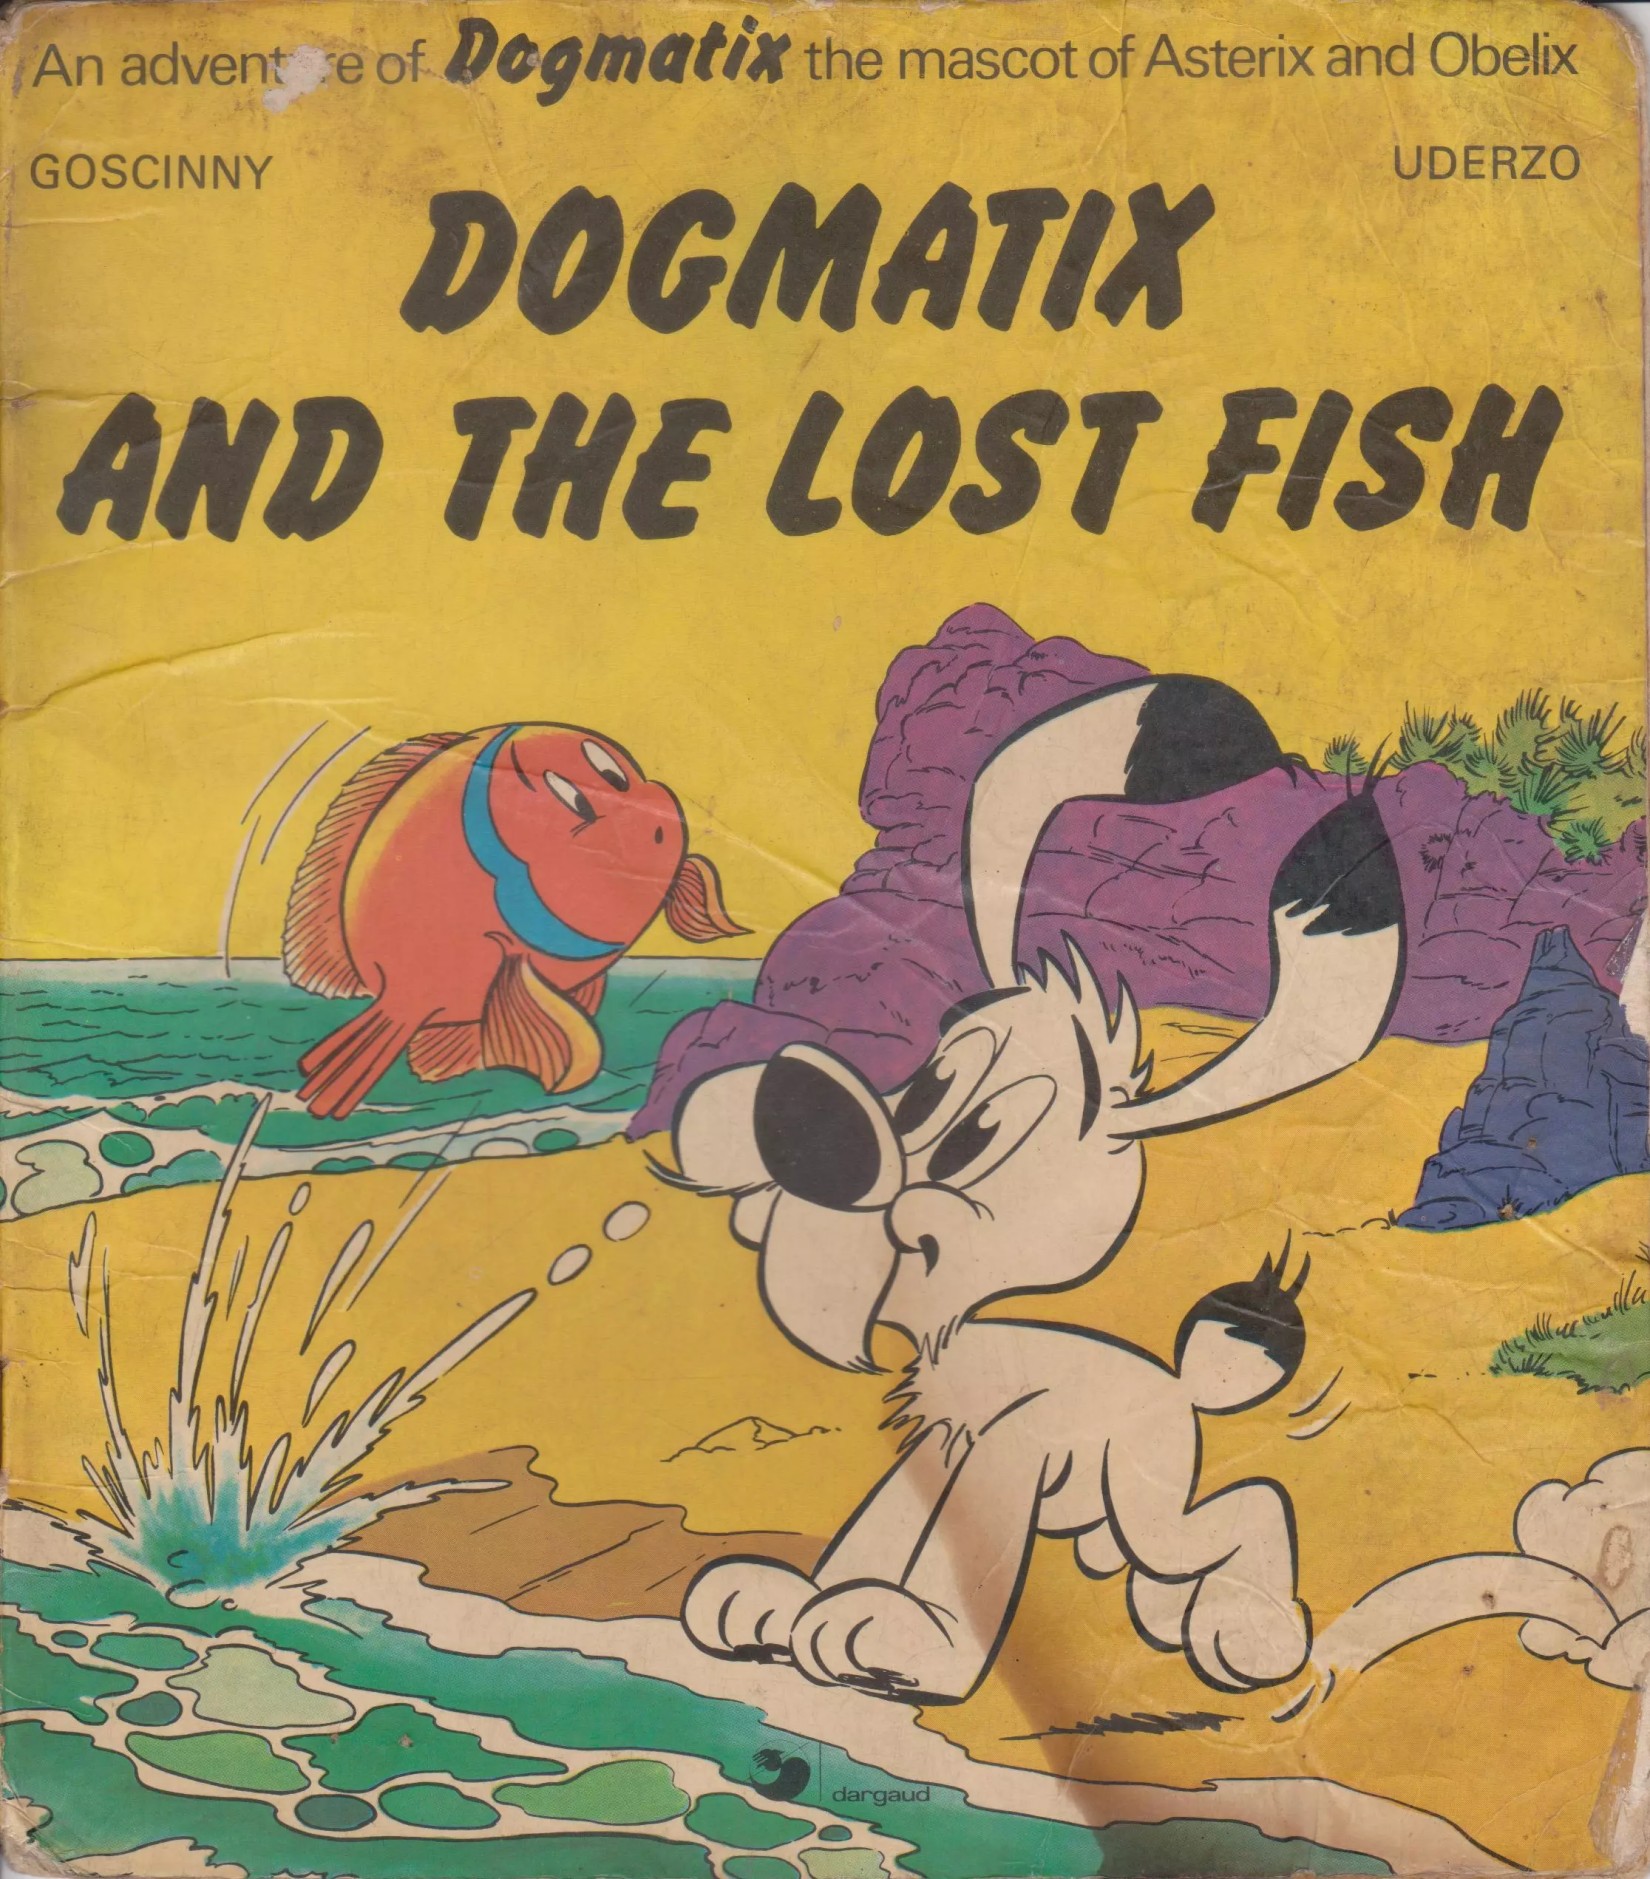 Dogmatix and the Lost Fish